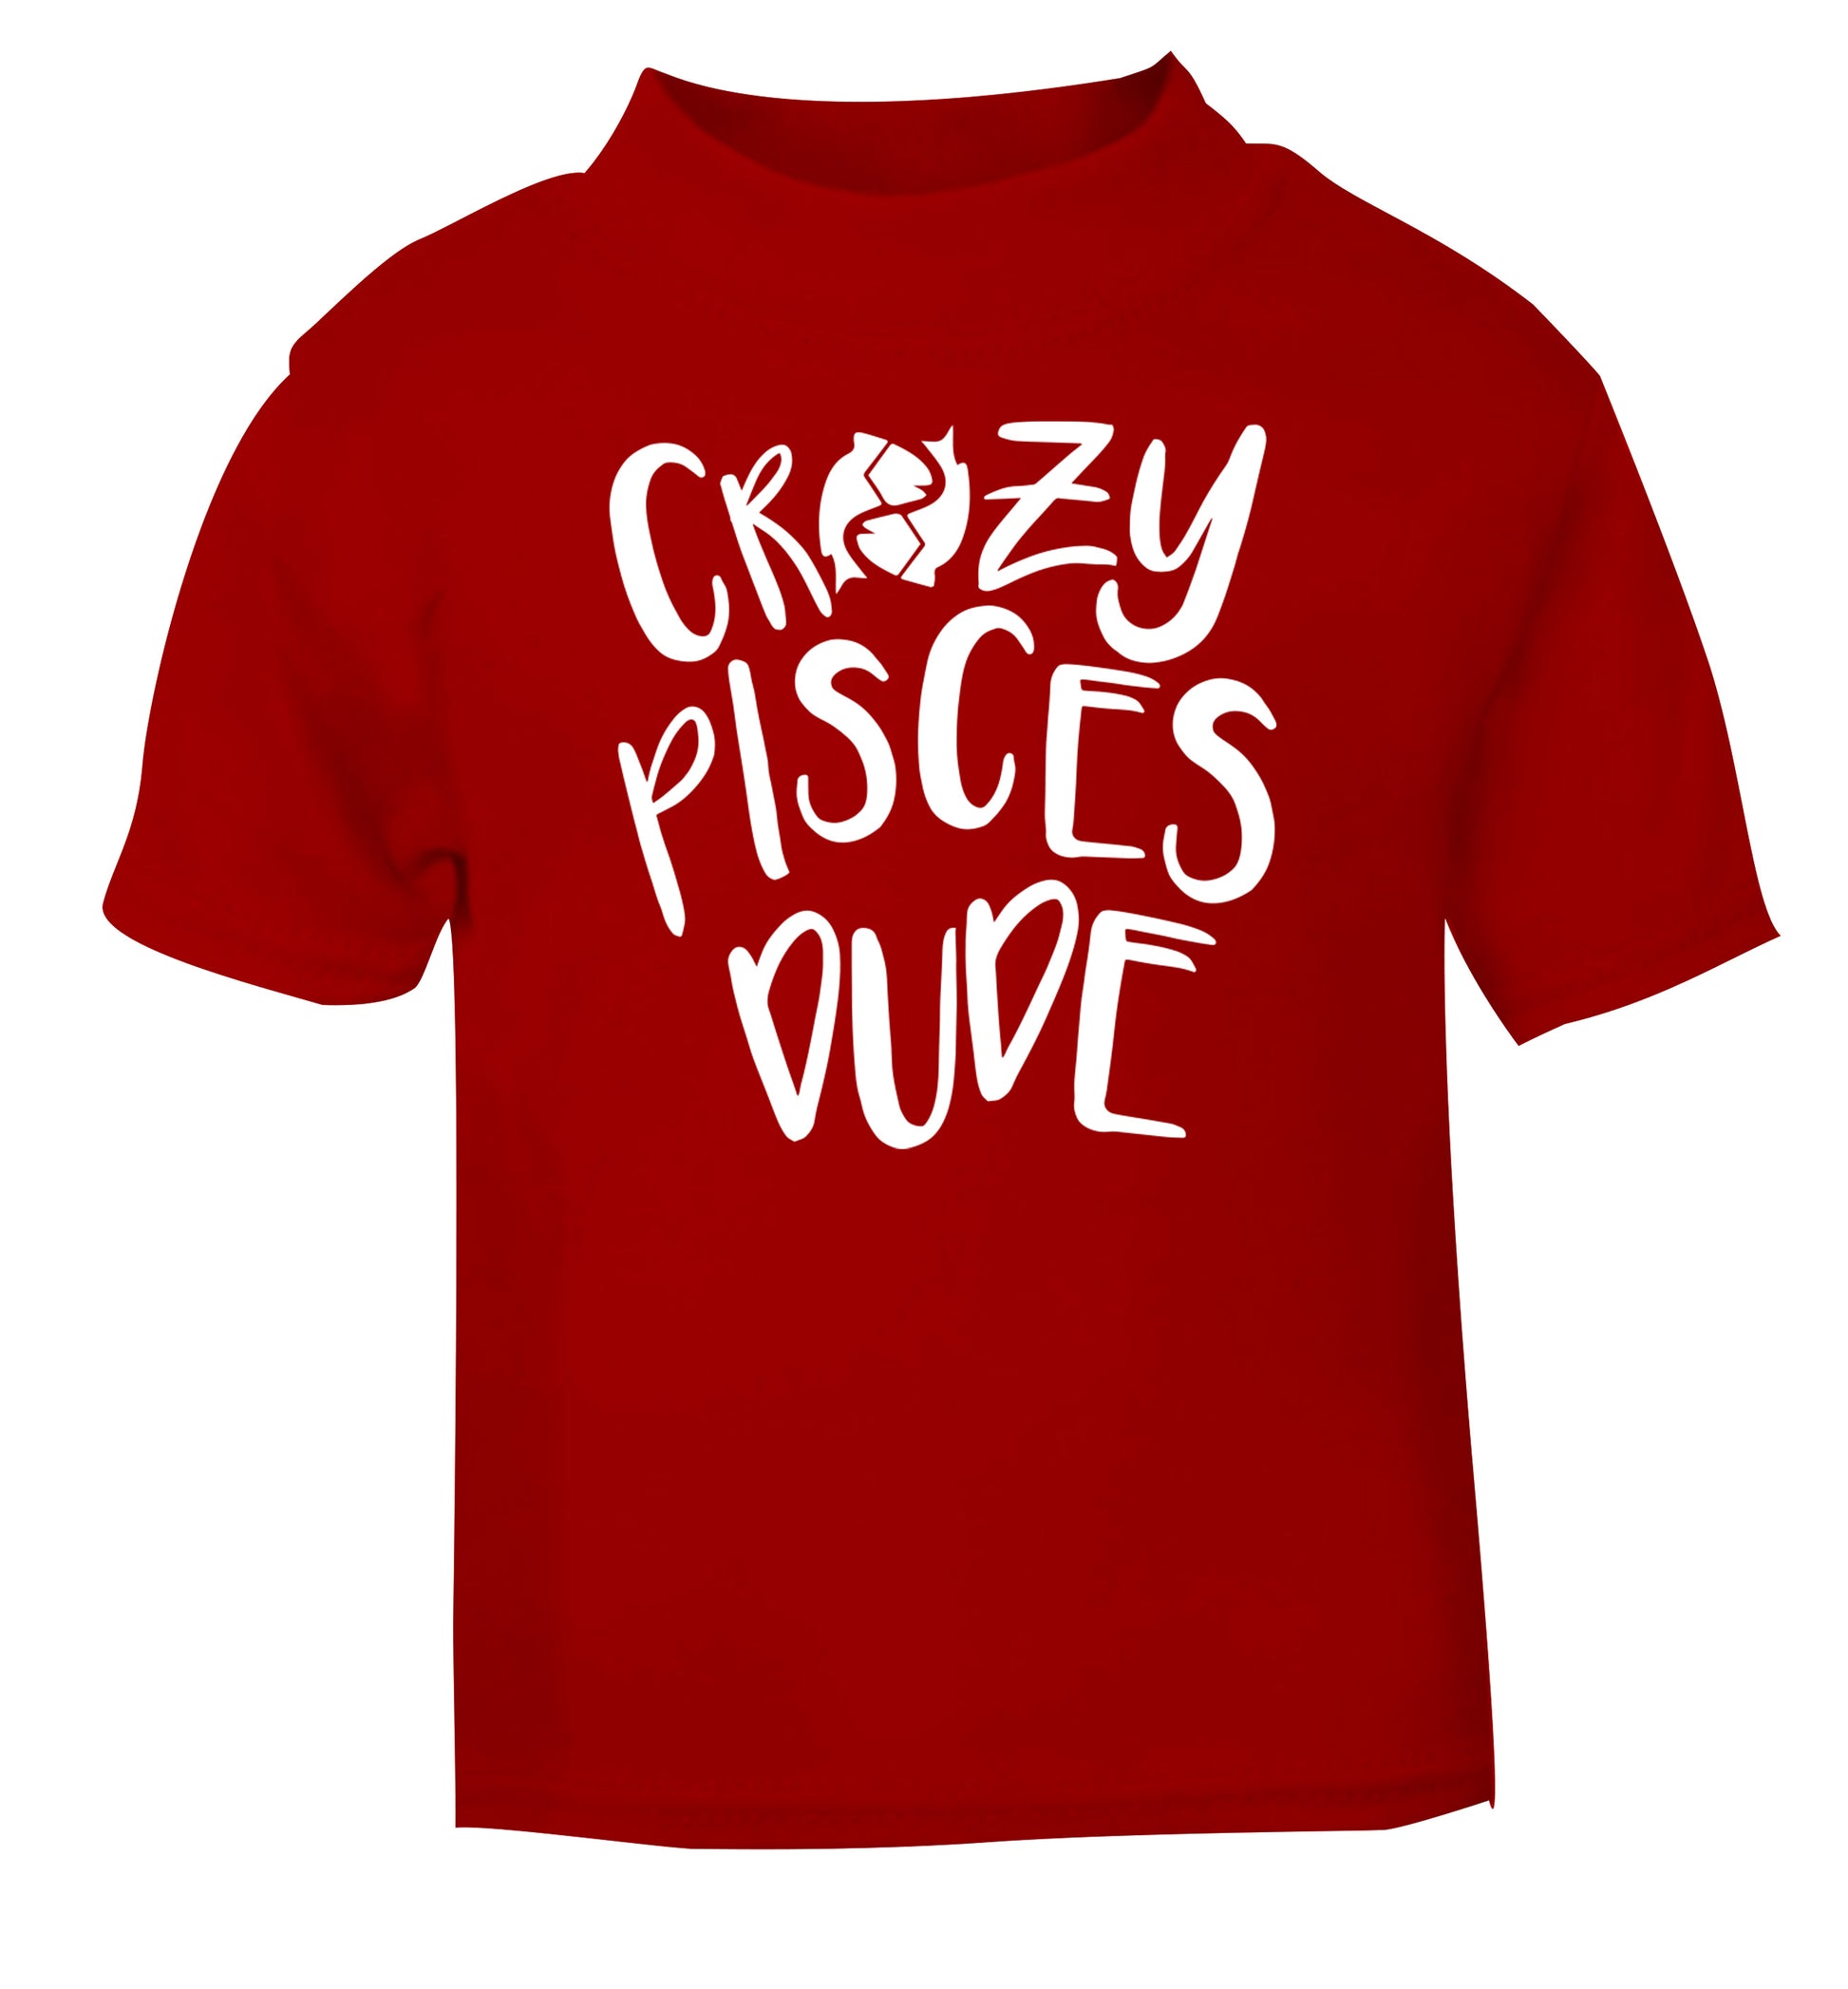 Crazy pisces dude red Baby Toddler Tshirt 2 Years